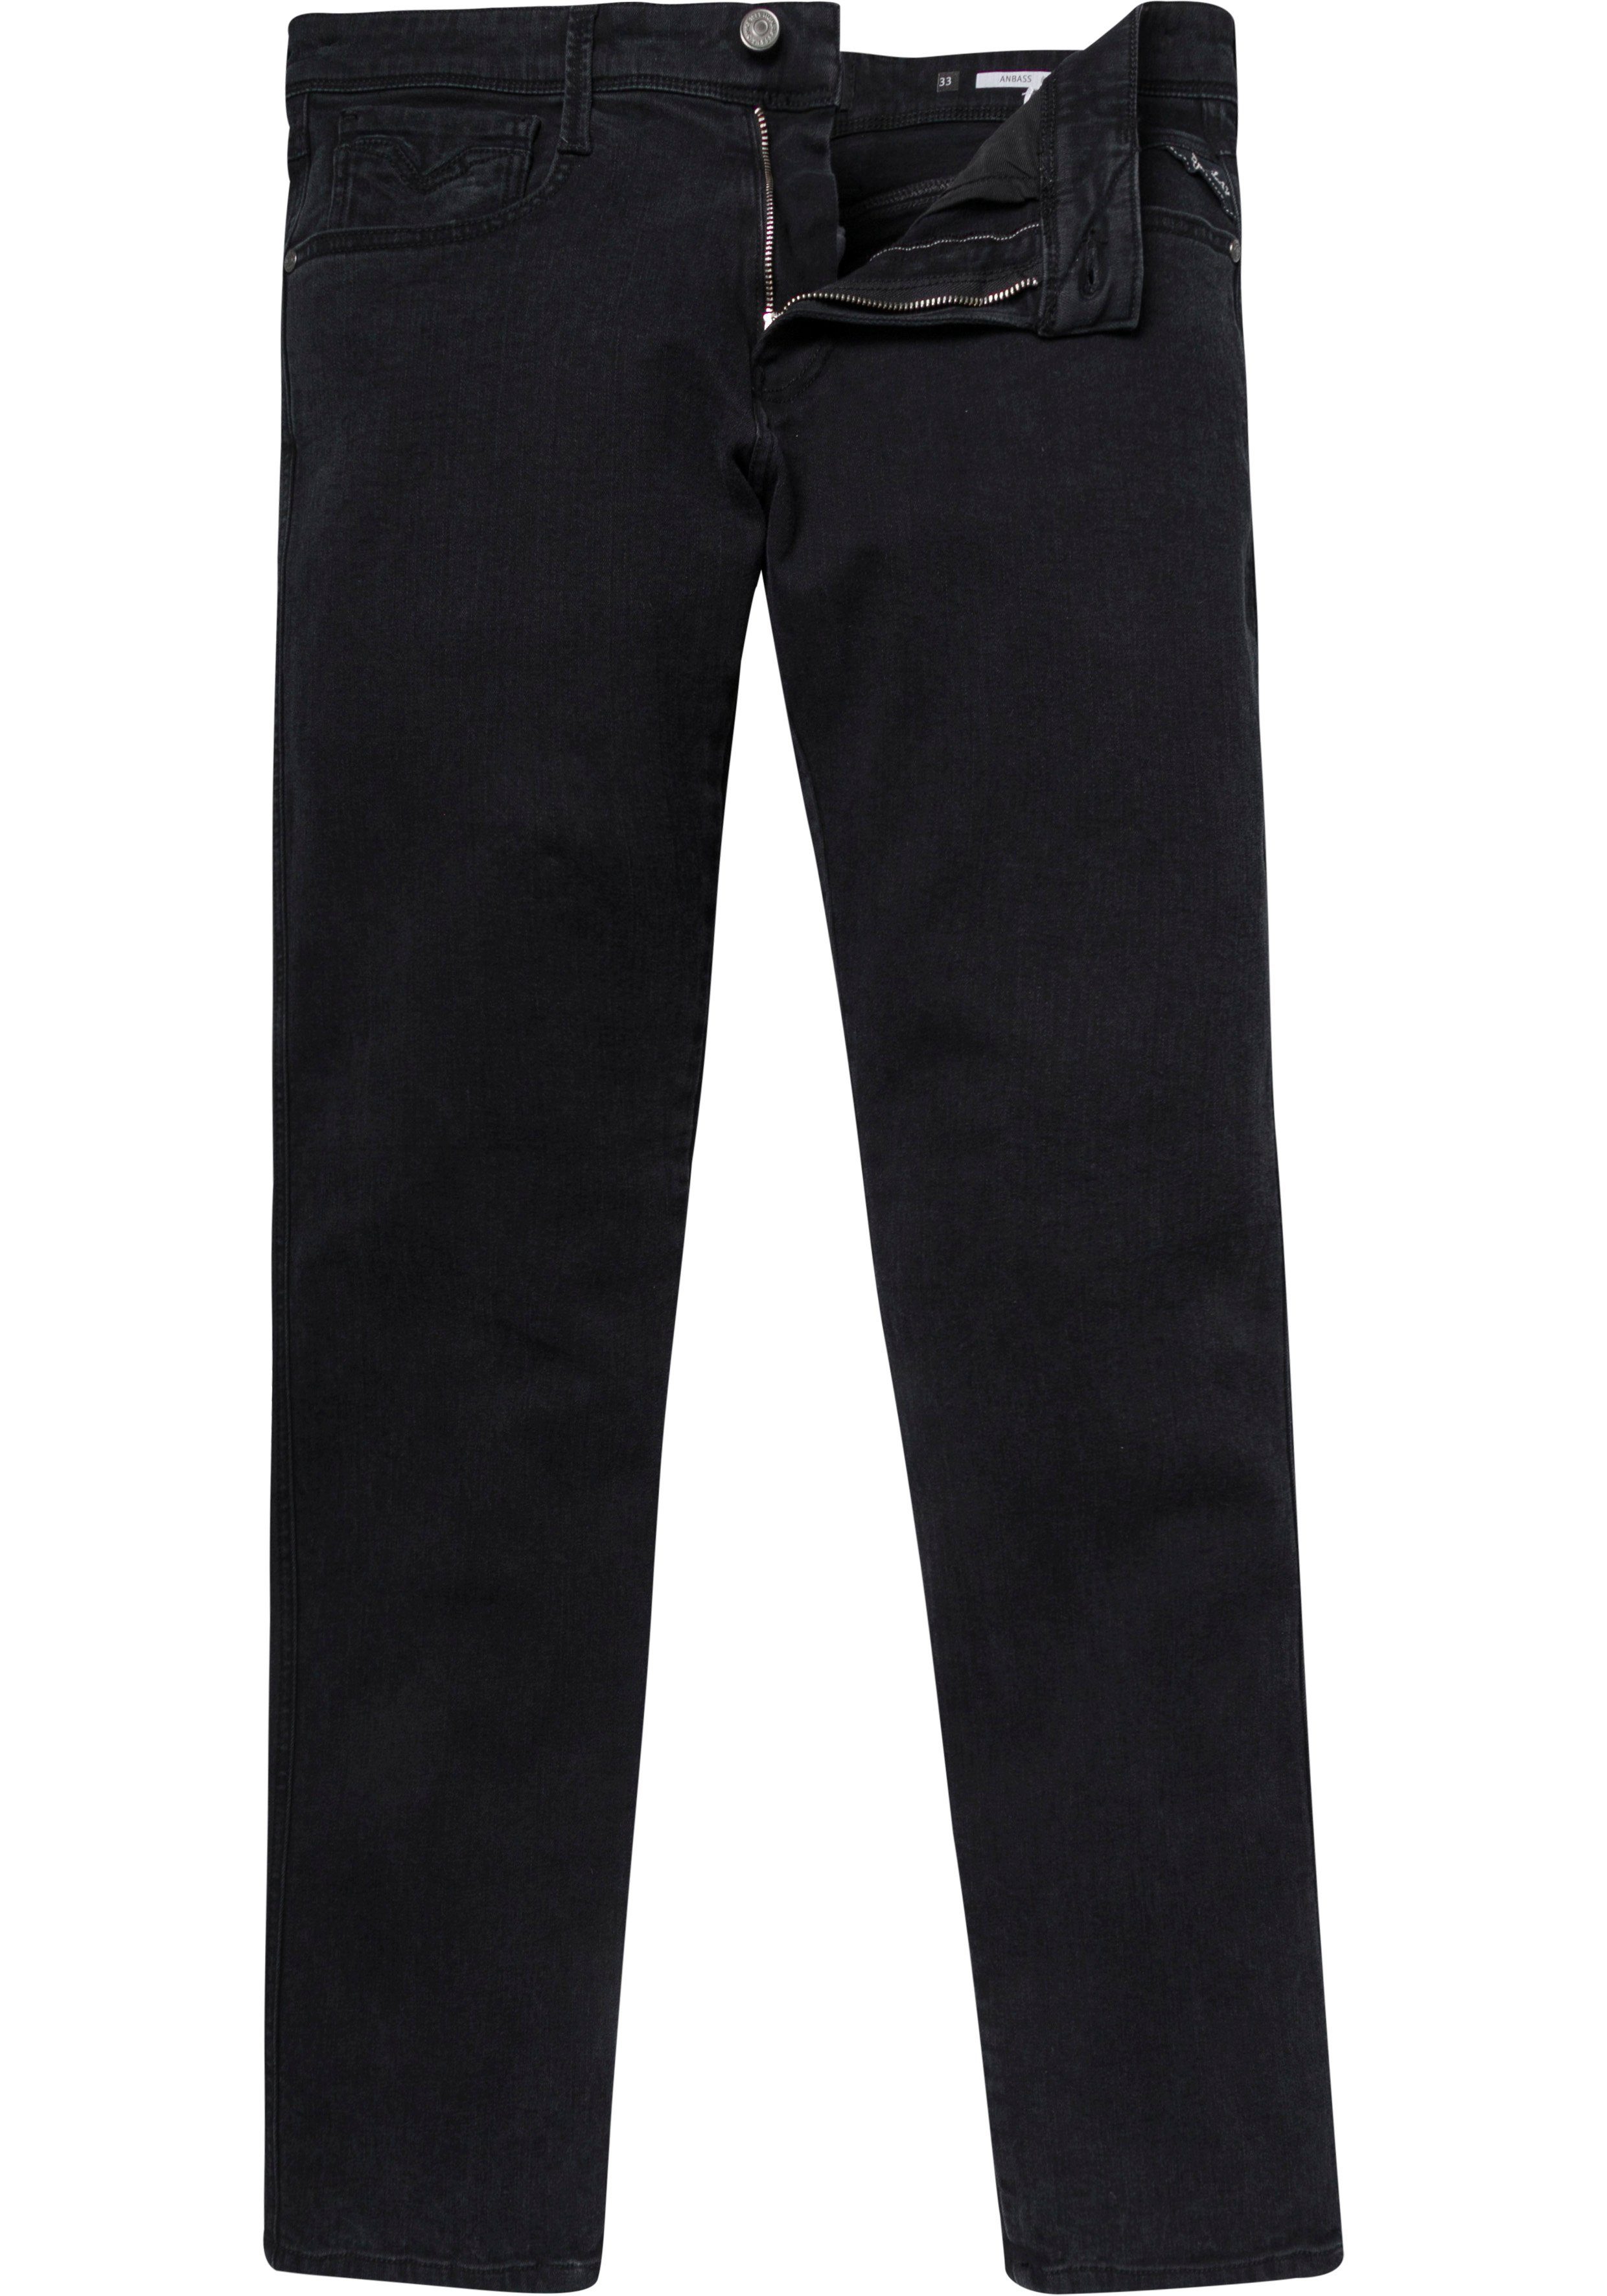 Replay ANBASS Slim-fit-Jeans black-wash